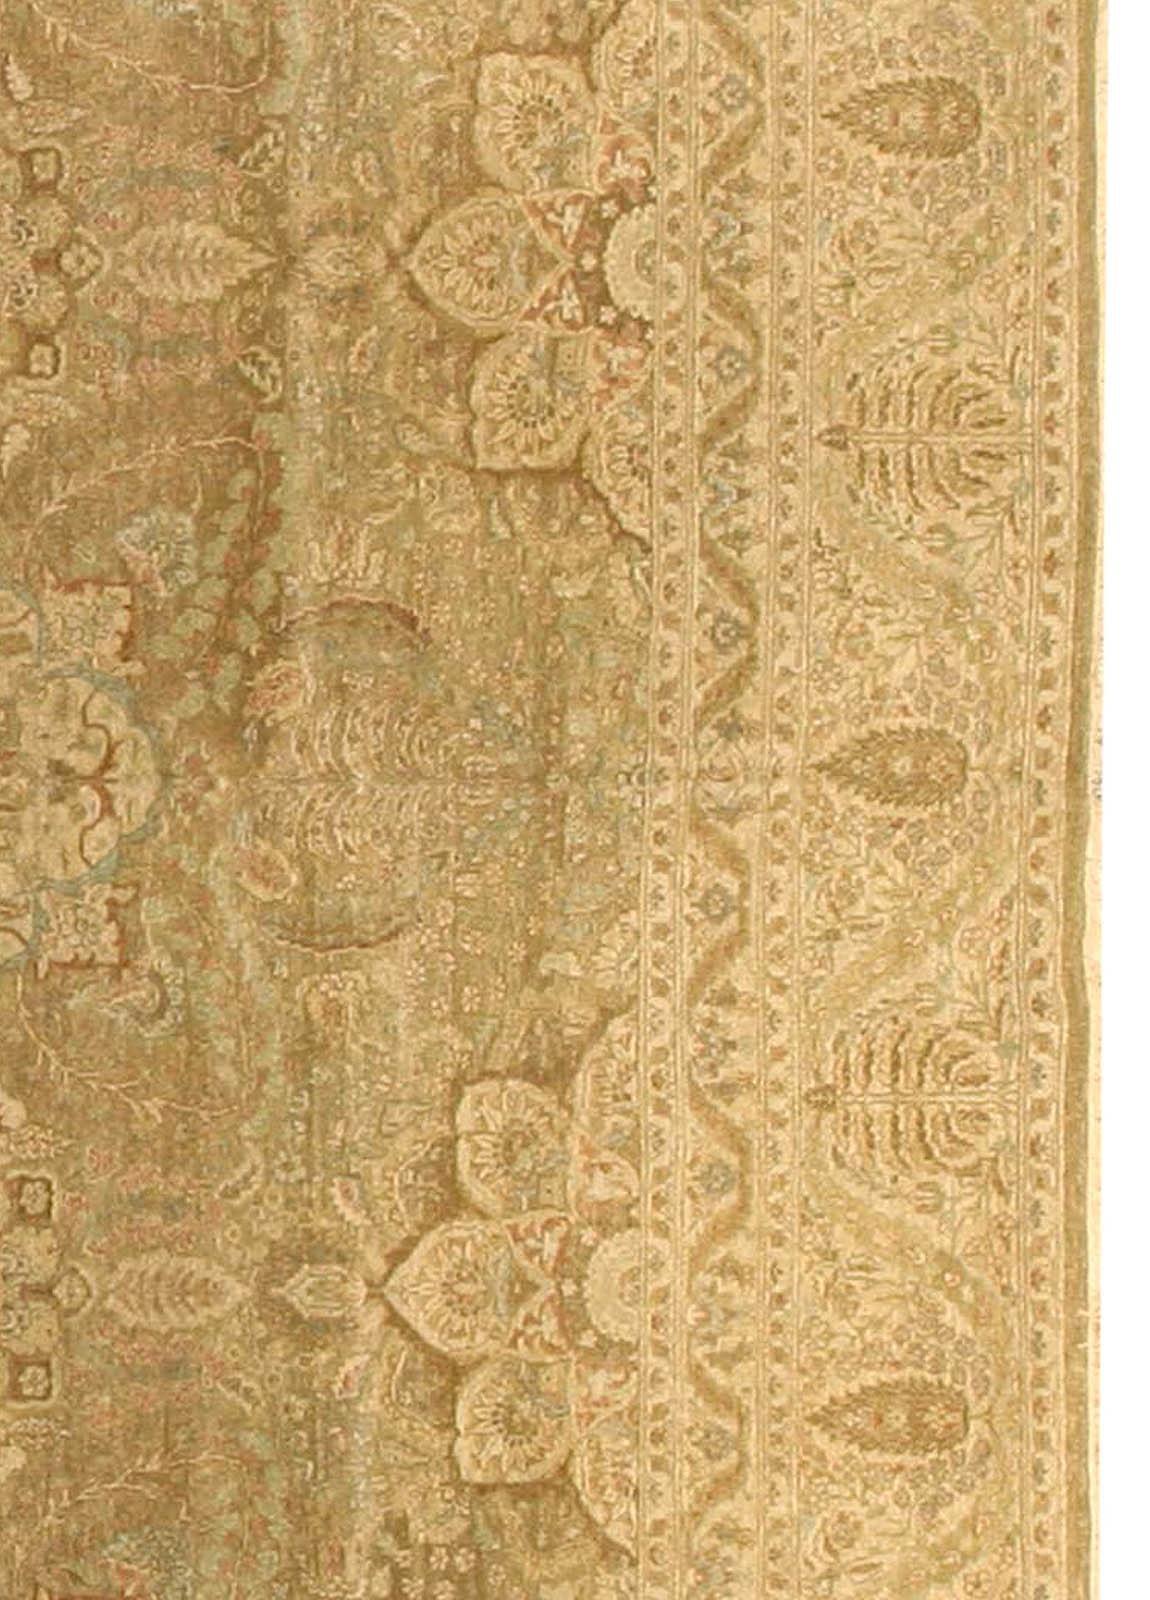 Contemporary Tabriz Floral Design Beige Handmade Rug by Doris Leslie Blau In New Condition For Sale In New York, NY